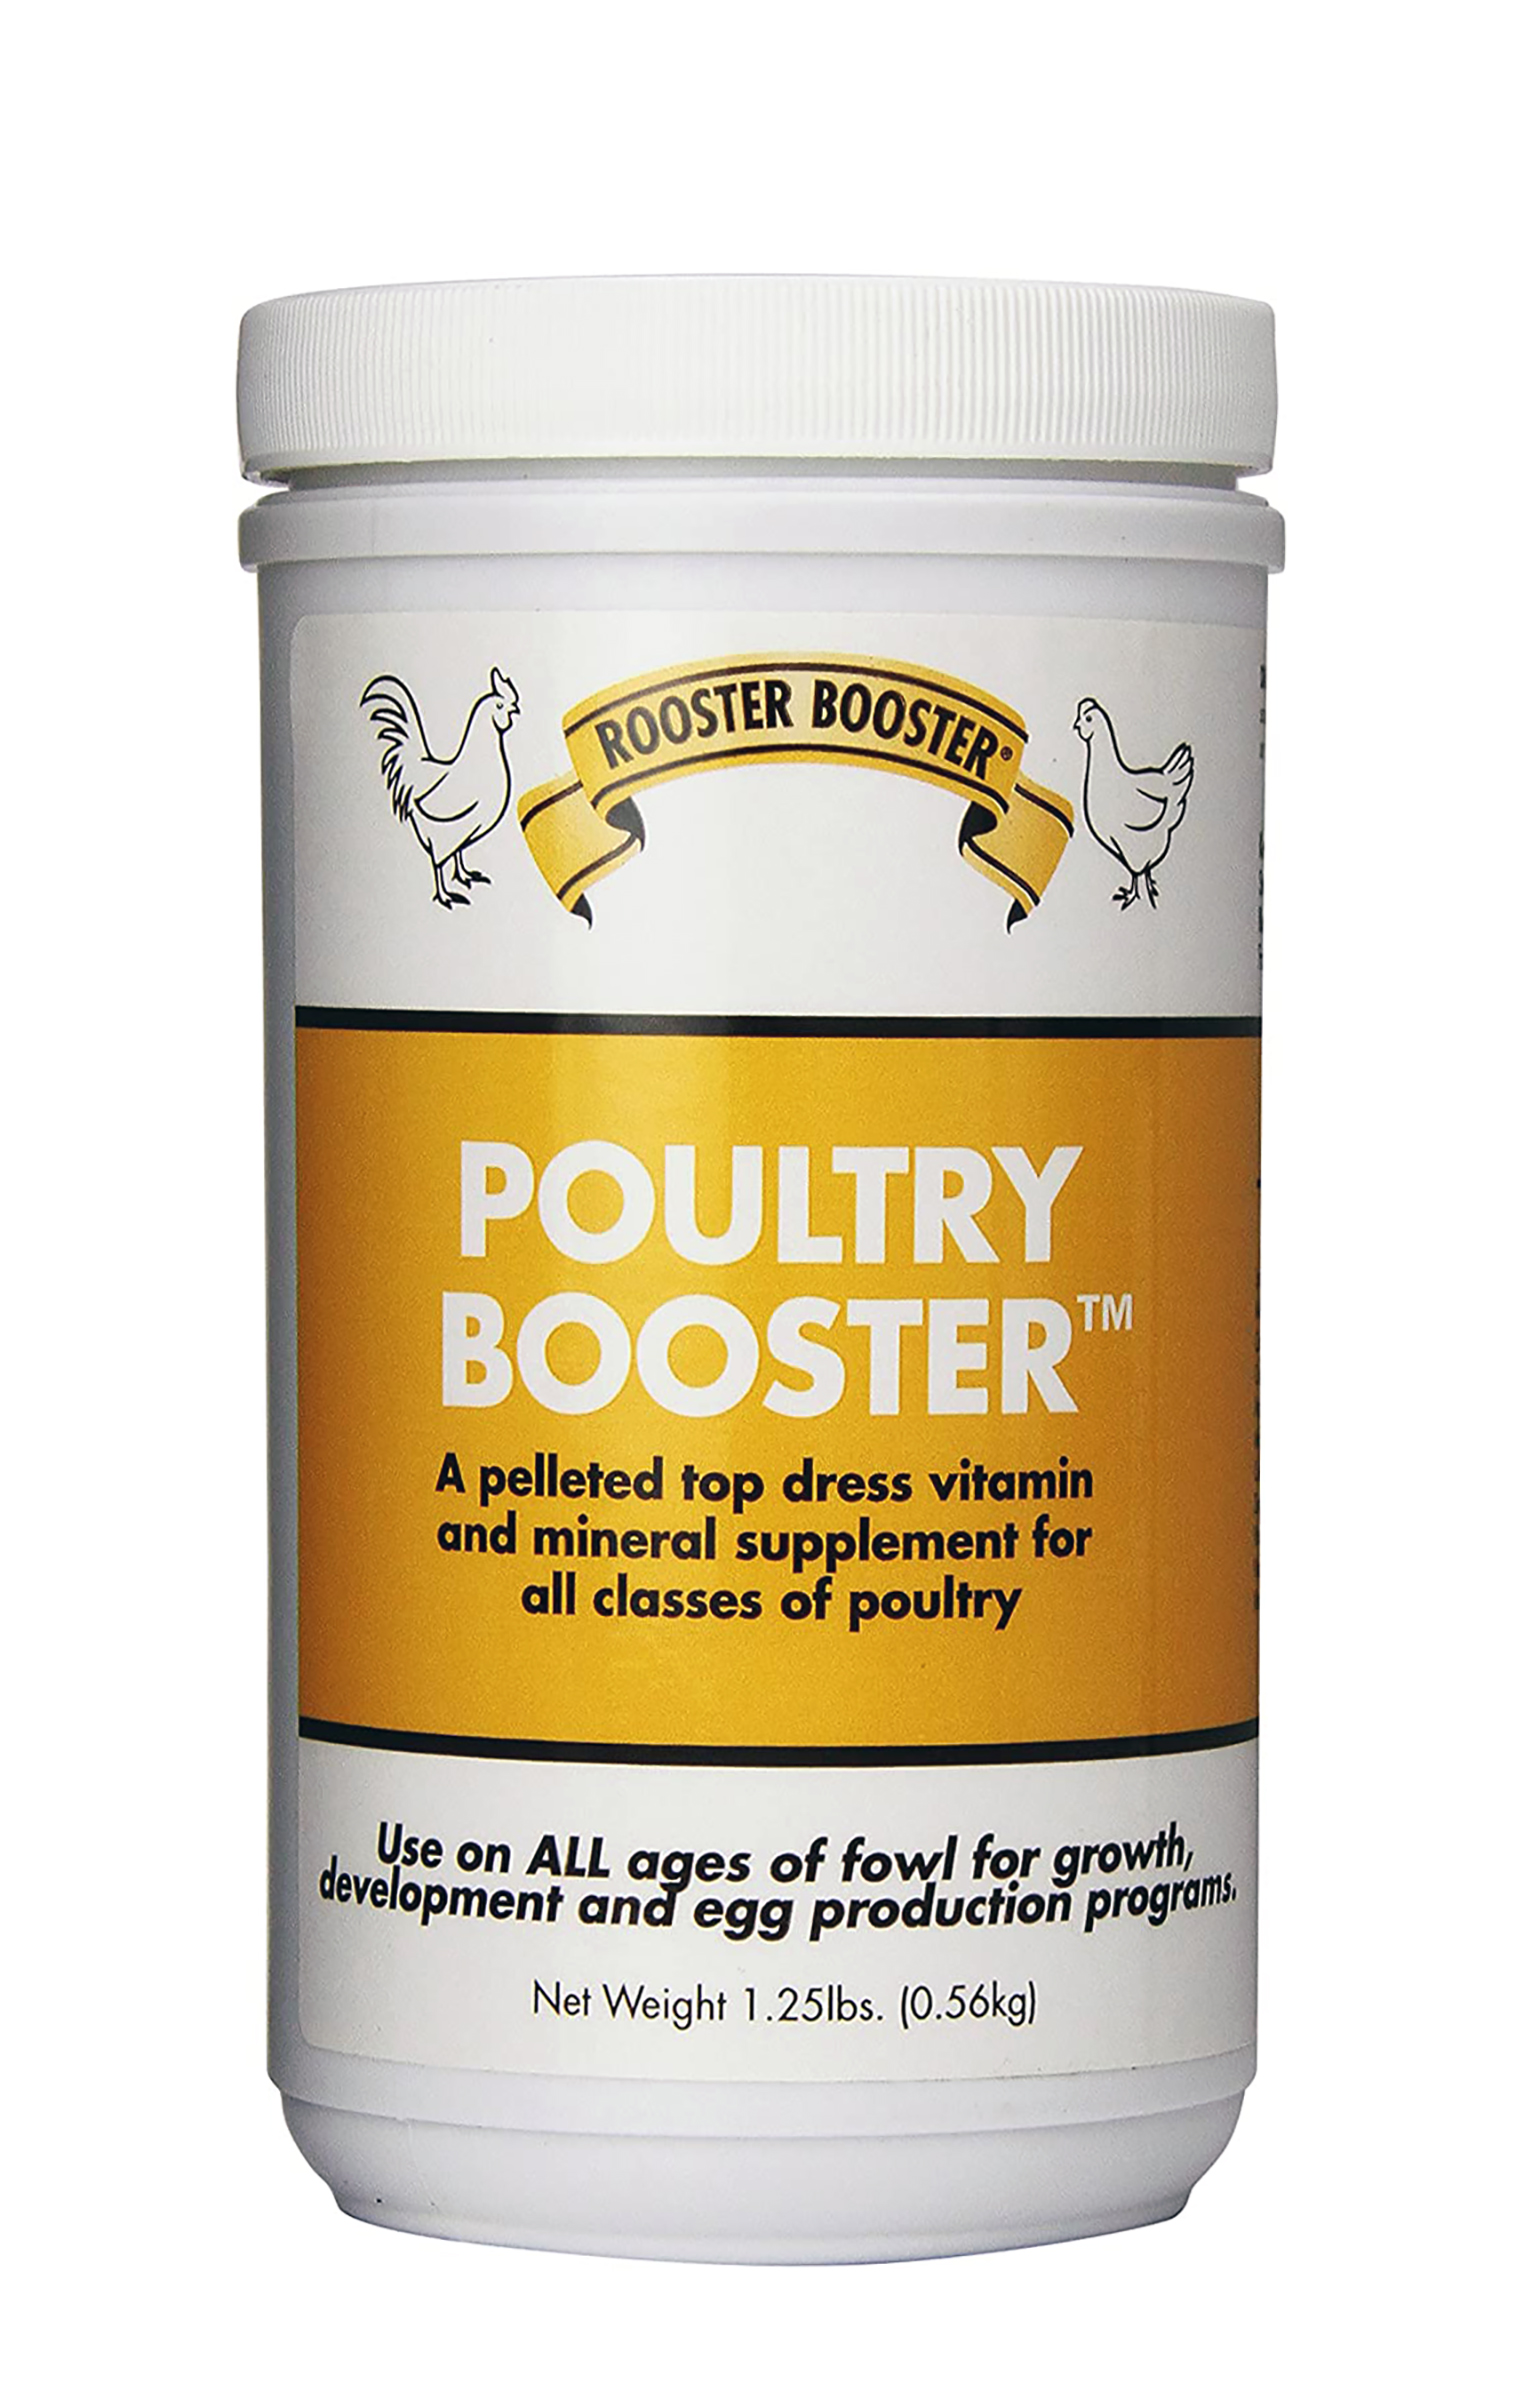 Poultry Booster review